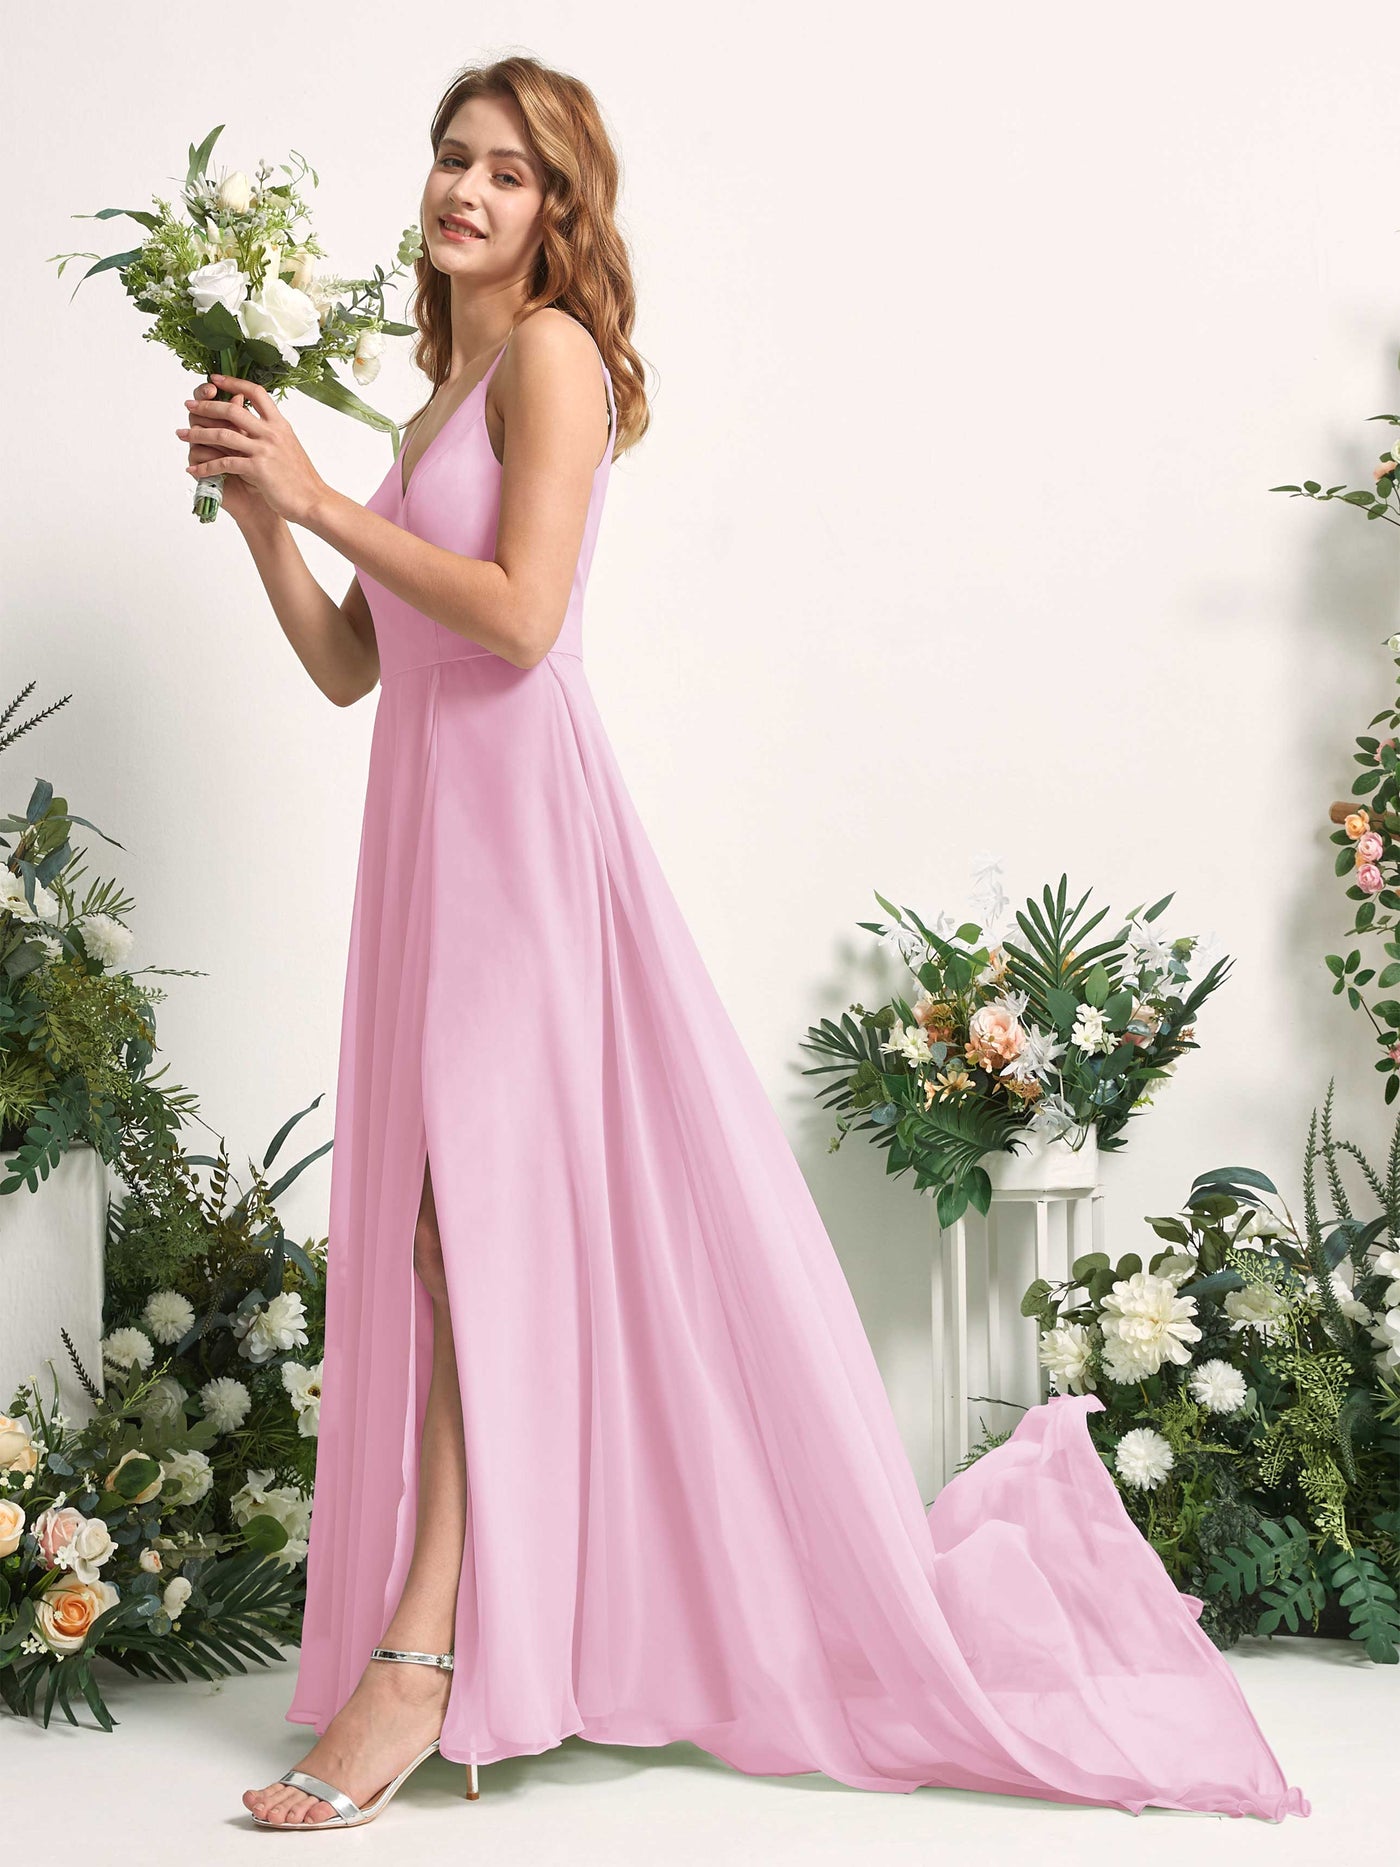 Bridesmaid Dress A-line Chiffon Spaghetti-straps Full Length Sleeveless Wedding Party Dress - Candy Pink (81227739)#color_candy-pink